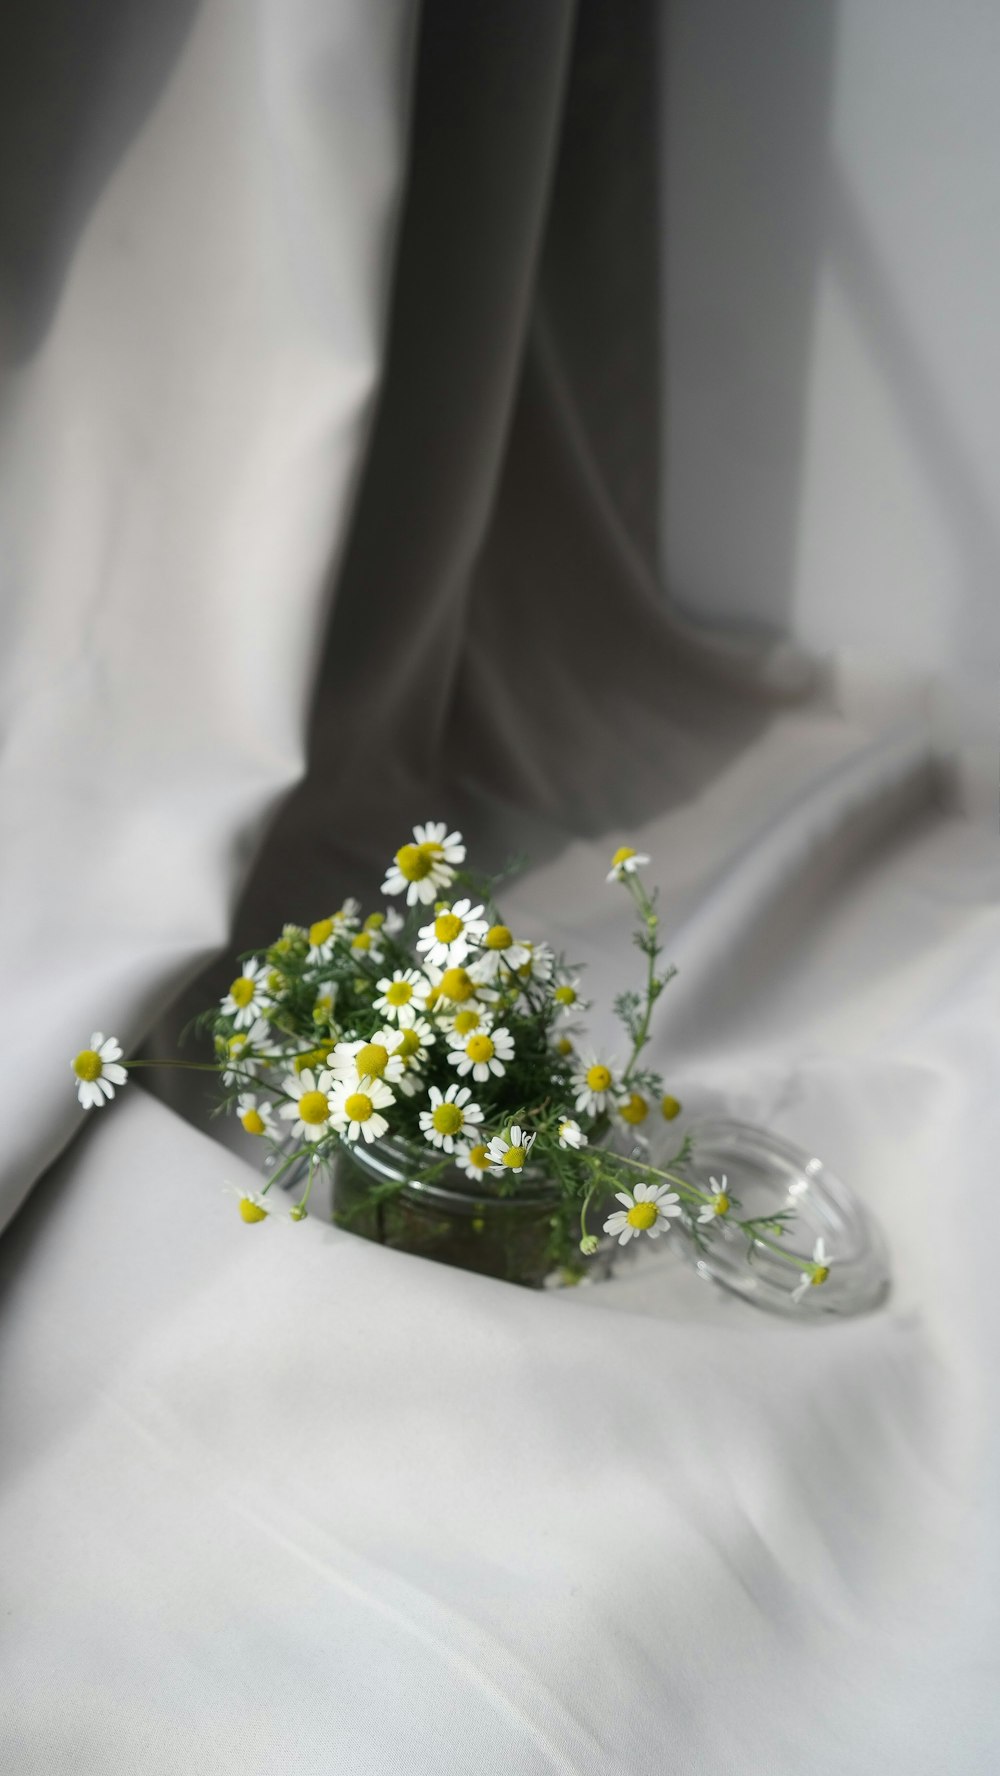 a glass vase filled with daisies on a white cloth